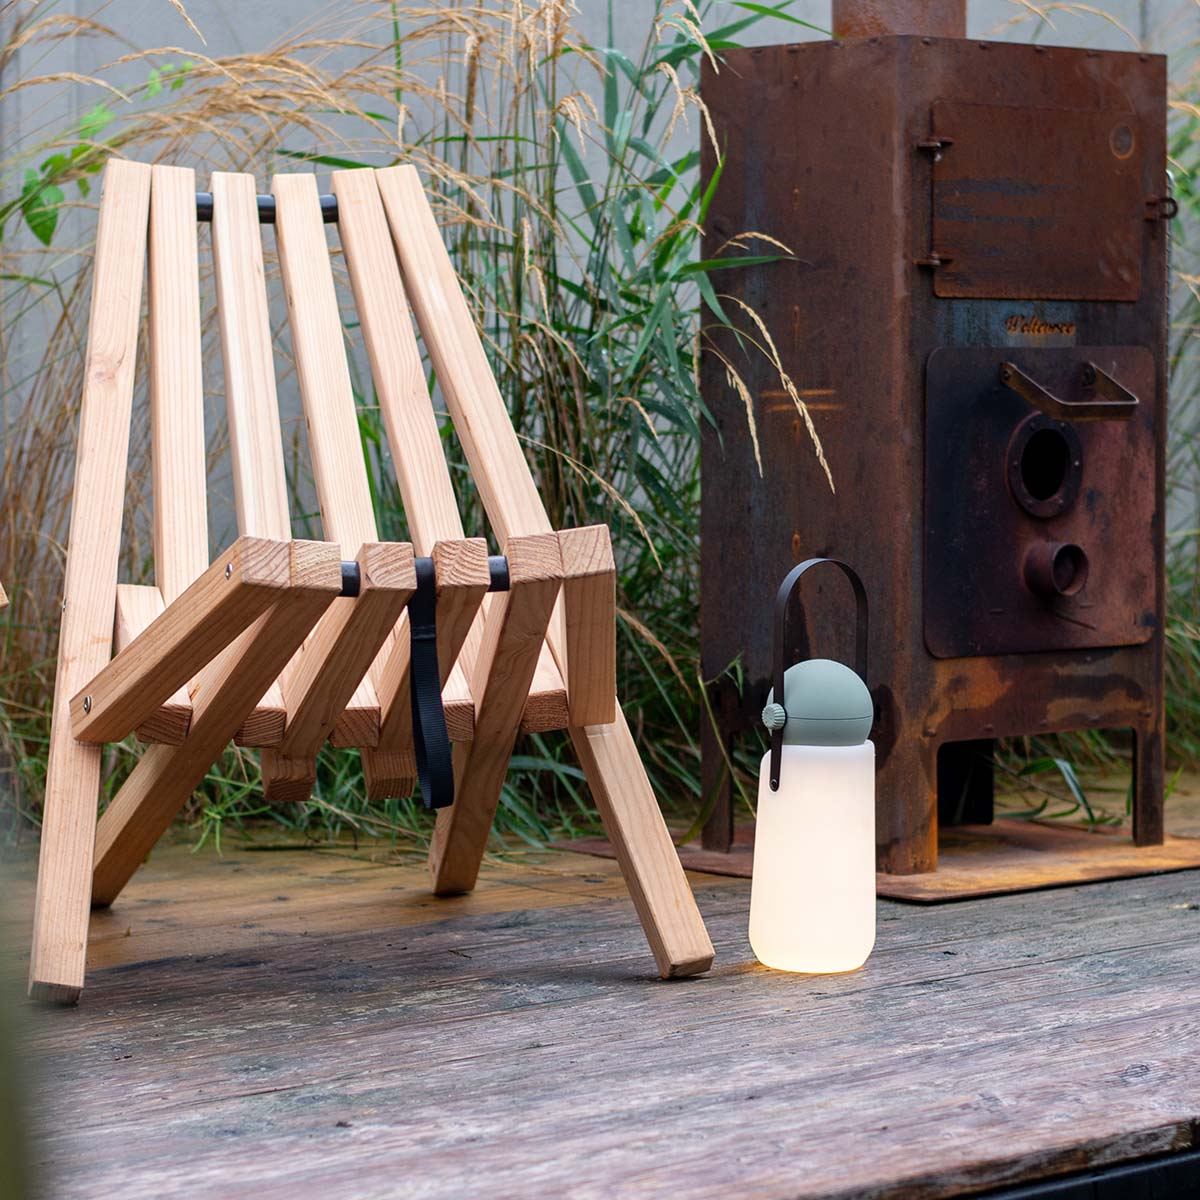 Weltevree Fieldchair, made entirely of untreated larch wood